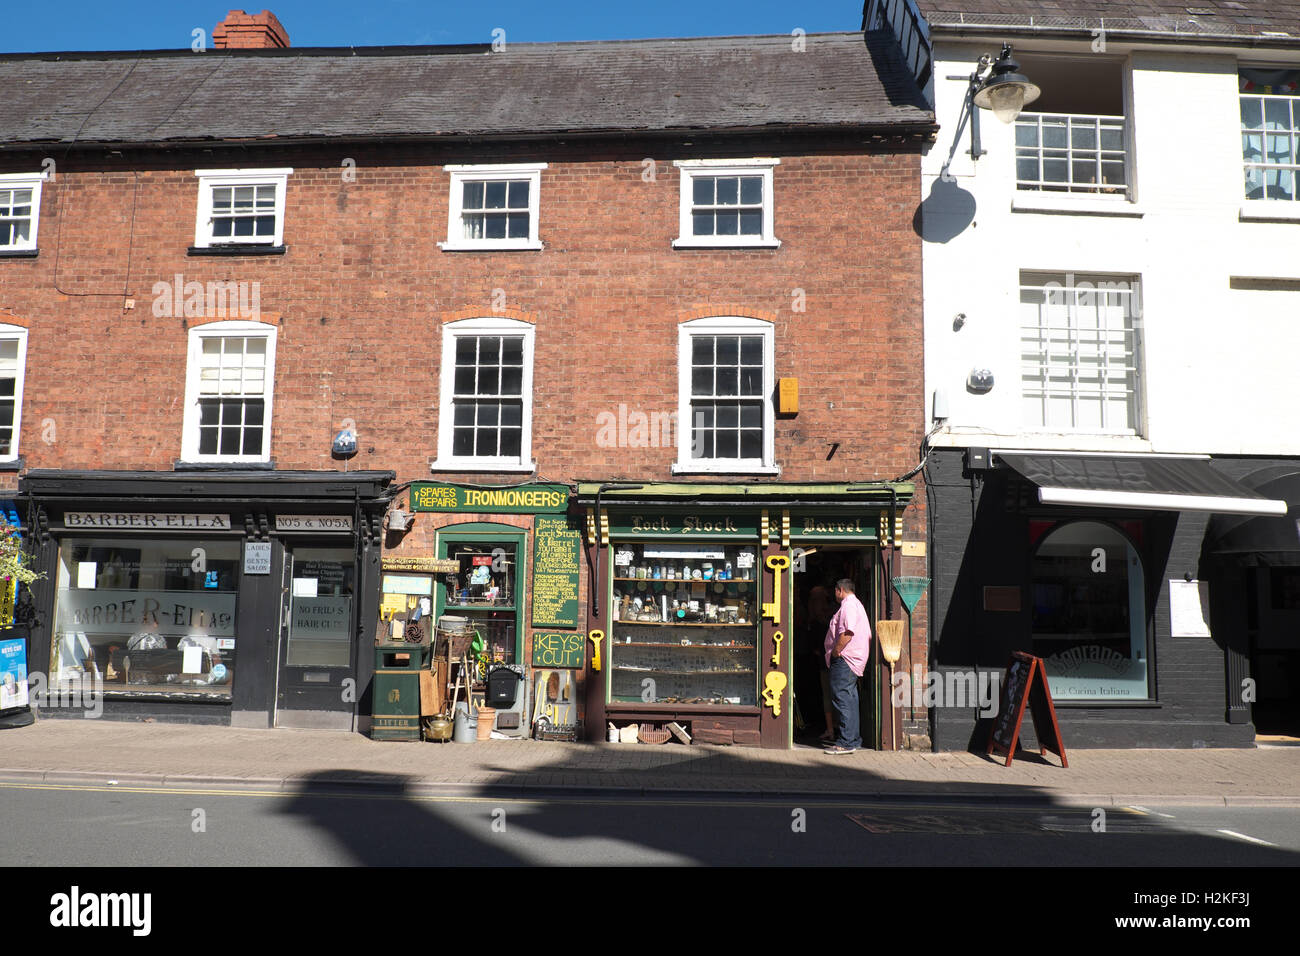 Hereford England UK - traditional ironmonger shop along St Owen Street in Hereford city centre Stock Photo